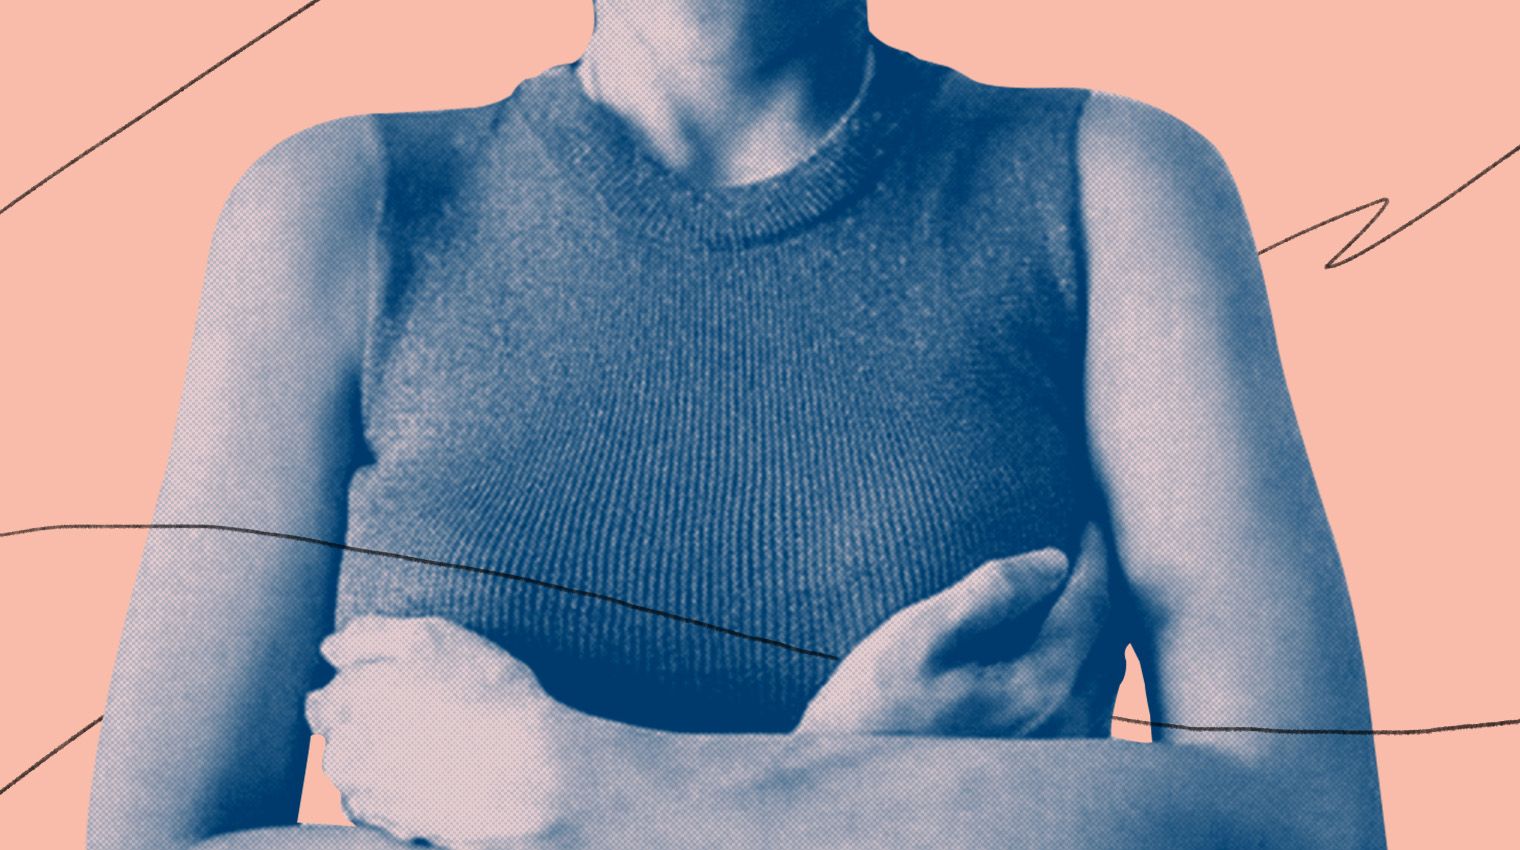 Why Does Holding Your Own Boobs Feel So Comforting?